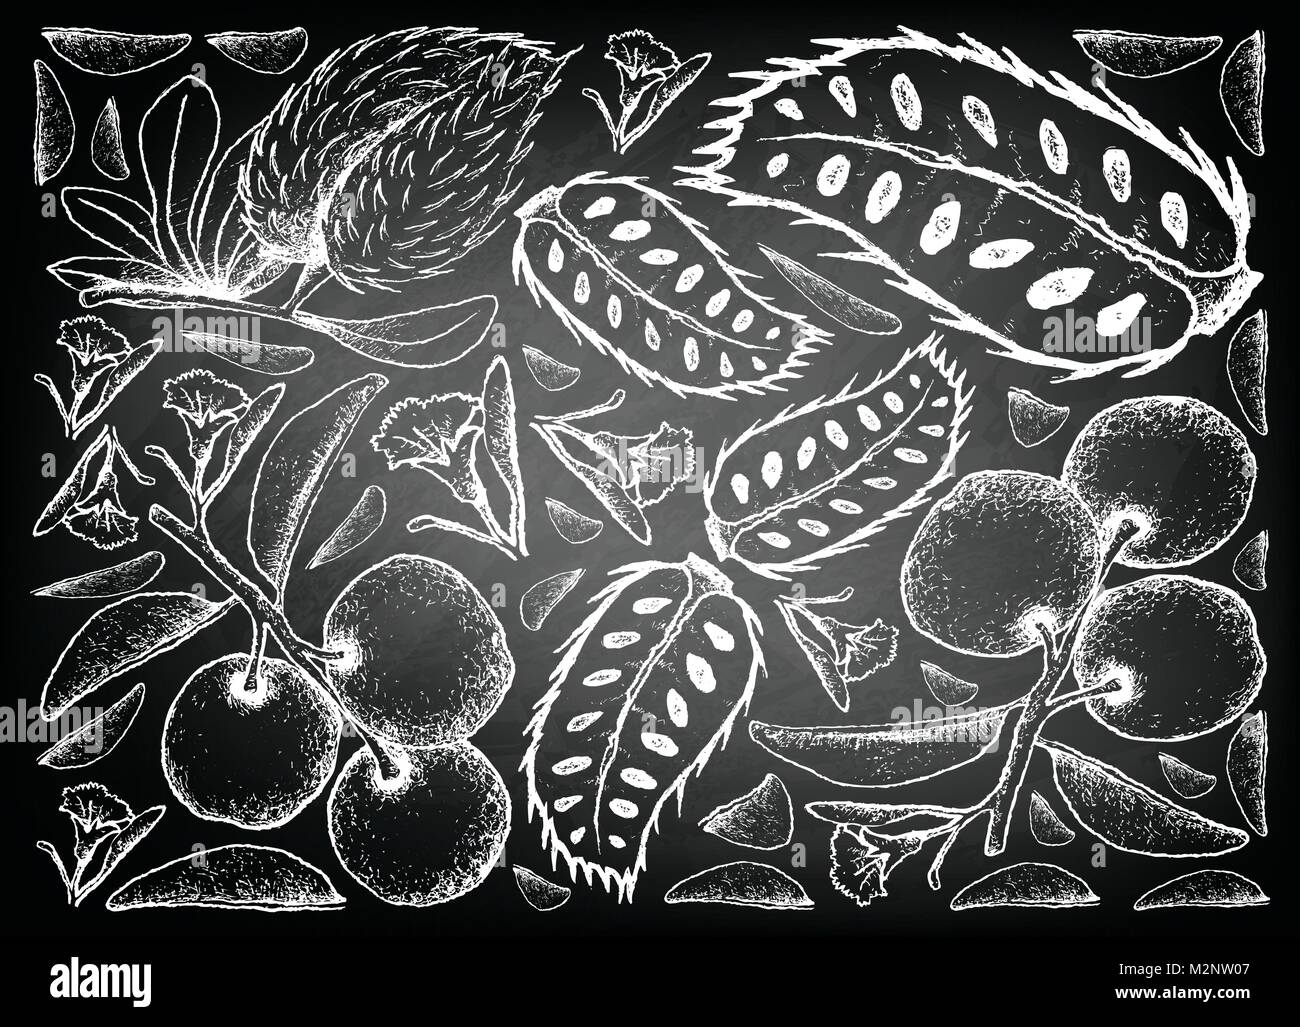 Fresh Fruits, Illustration Background of Hand Drawn Sketch Fresh Tallow Plum or Ximenia Americana and Soursop or Annona Muricata Fruits on Black Chalk Stock Vector